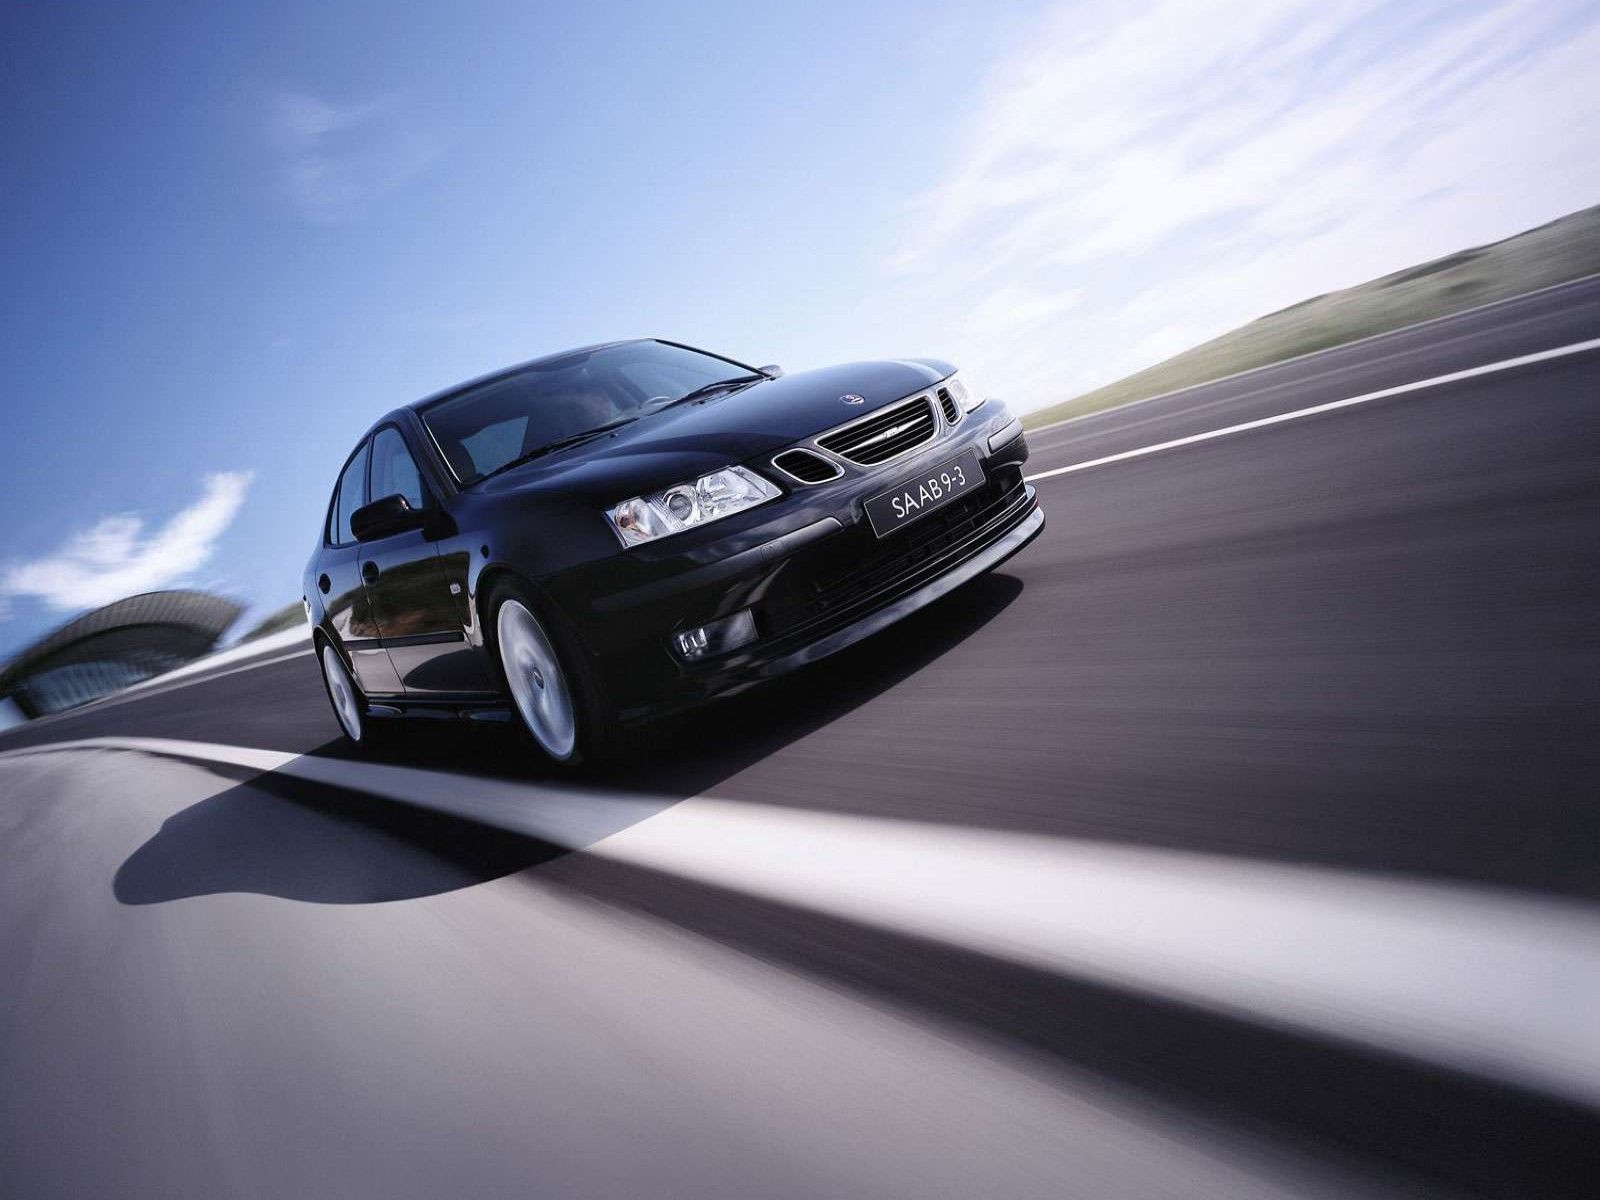 new car Saab 9-5 wallpapers and images - wallpapers, pictures, photos